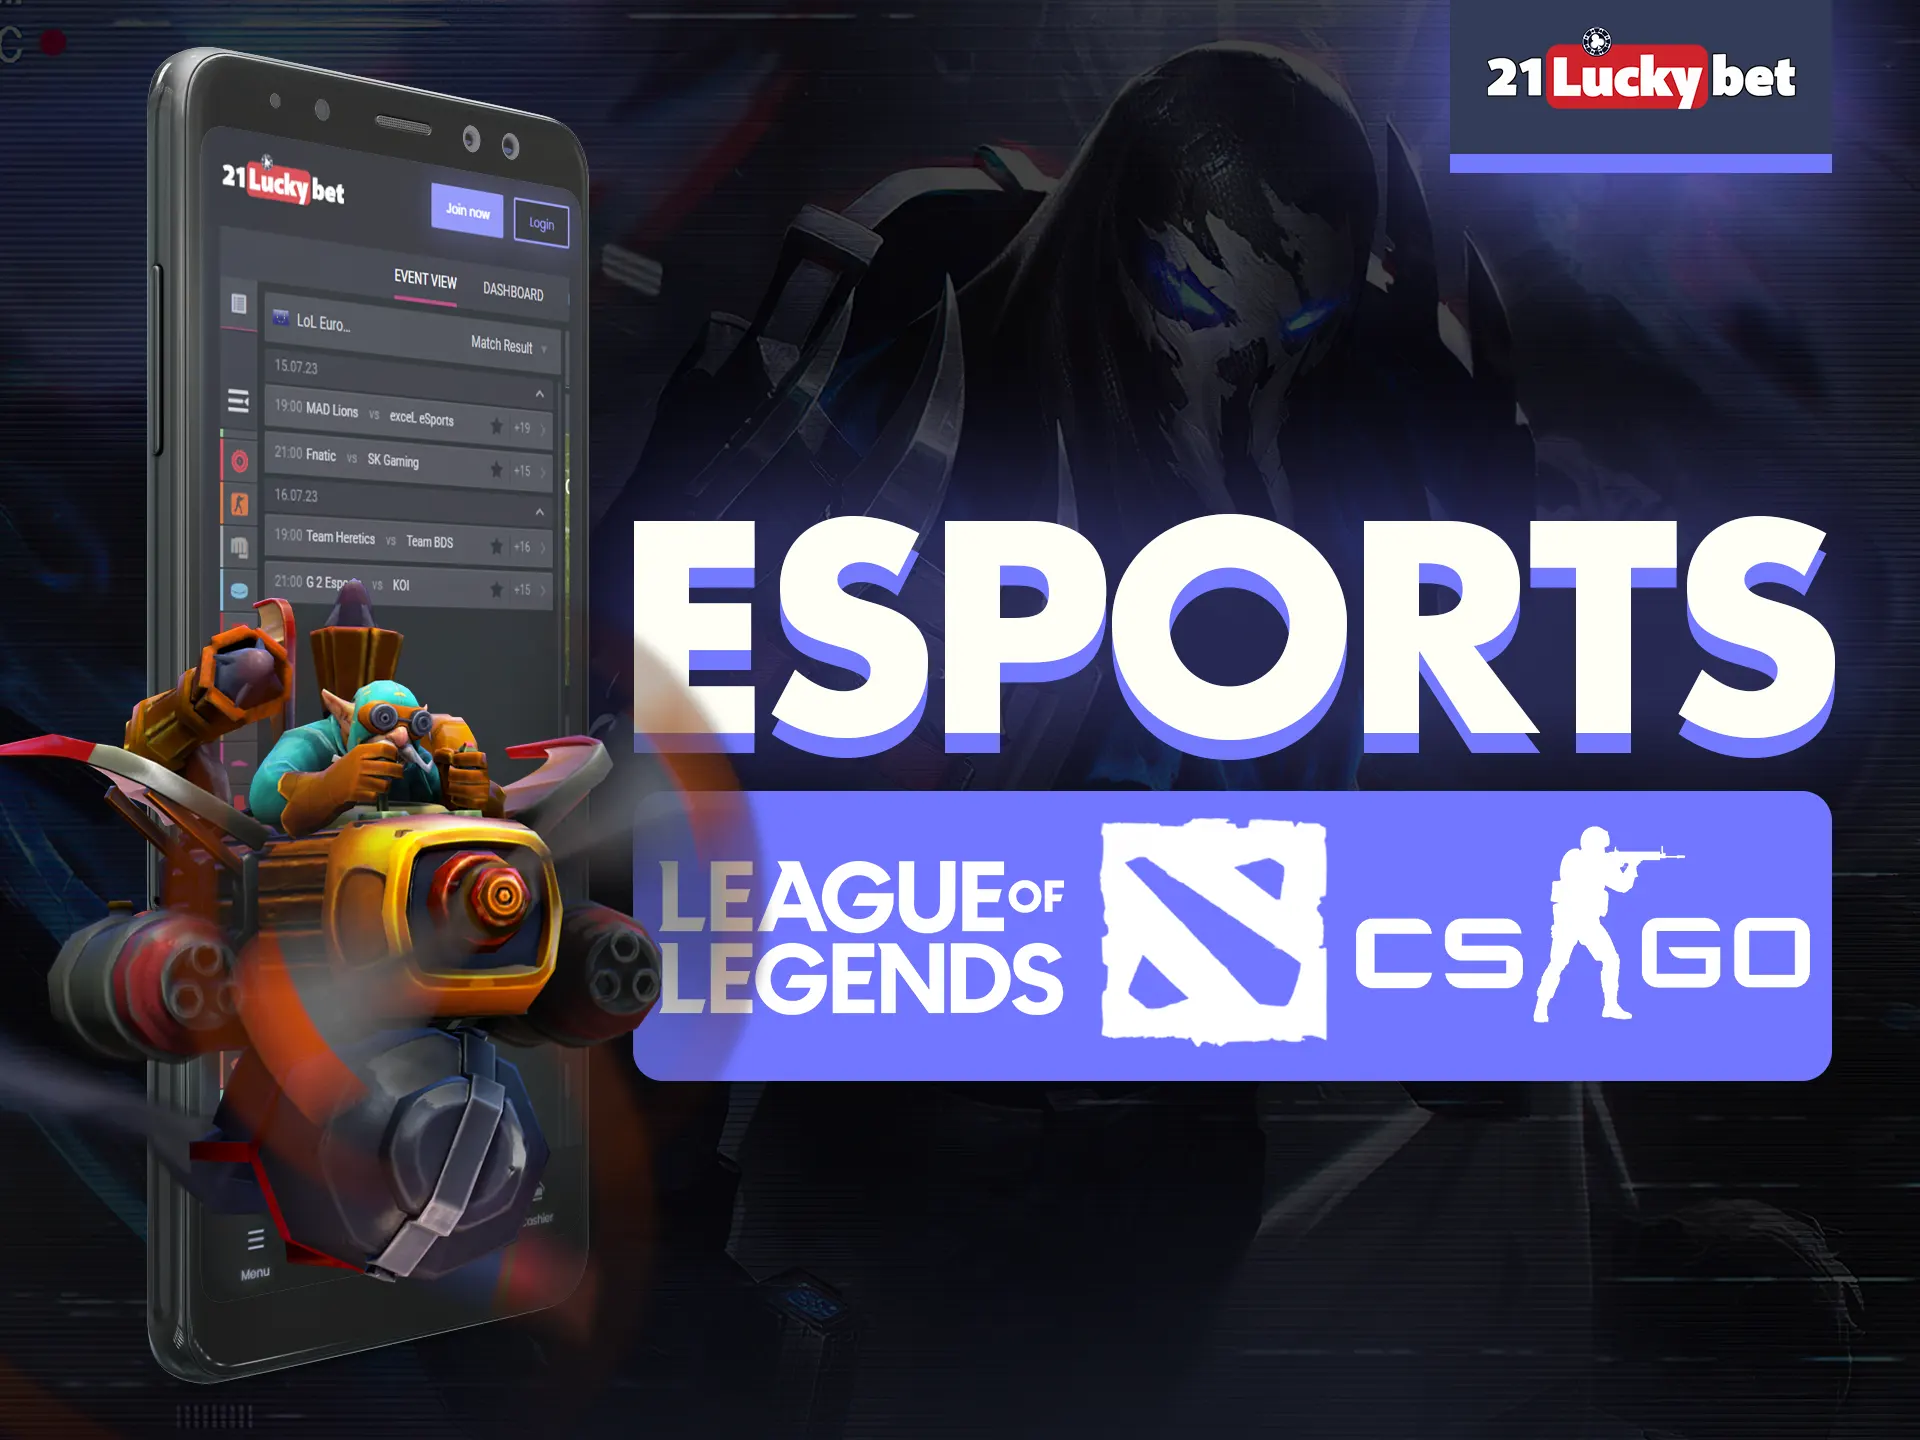 In 21luckybet app bet on various esports games.